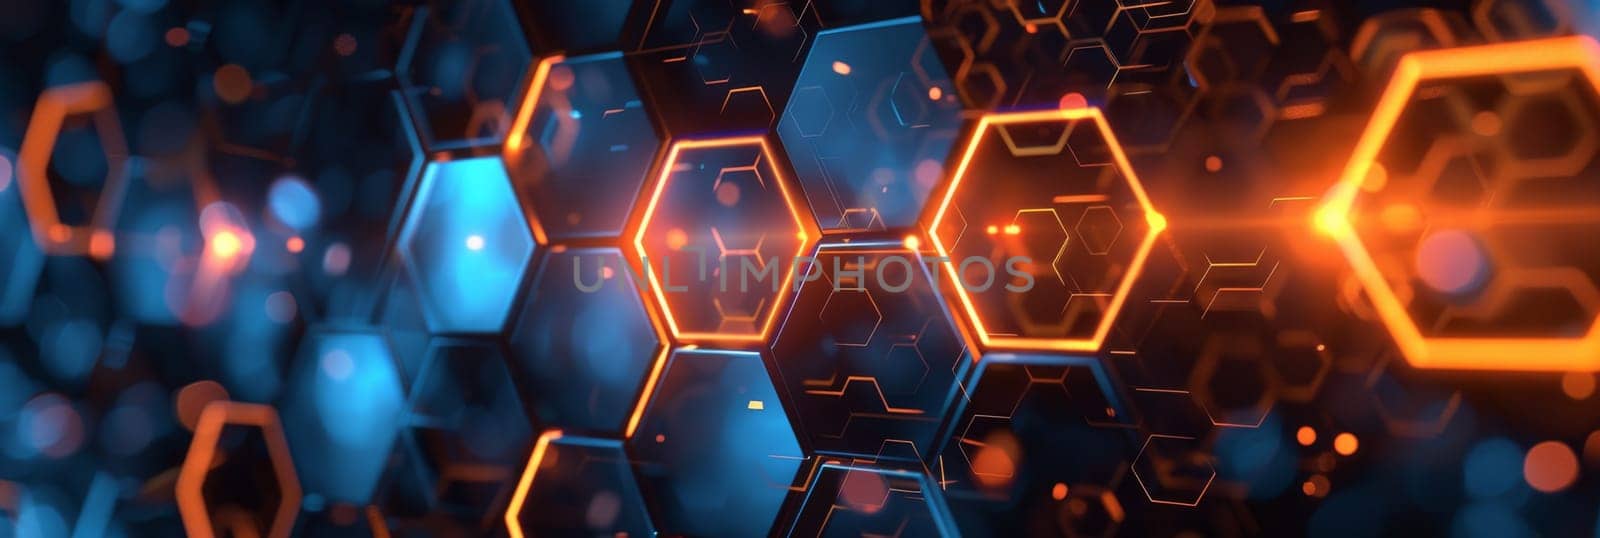 A futuristic abstract background with orange and blue lights